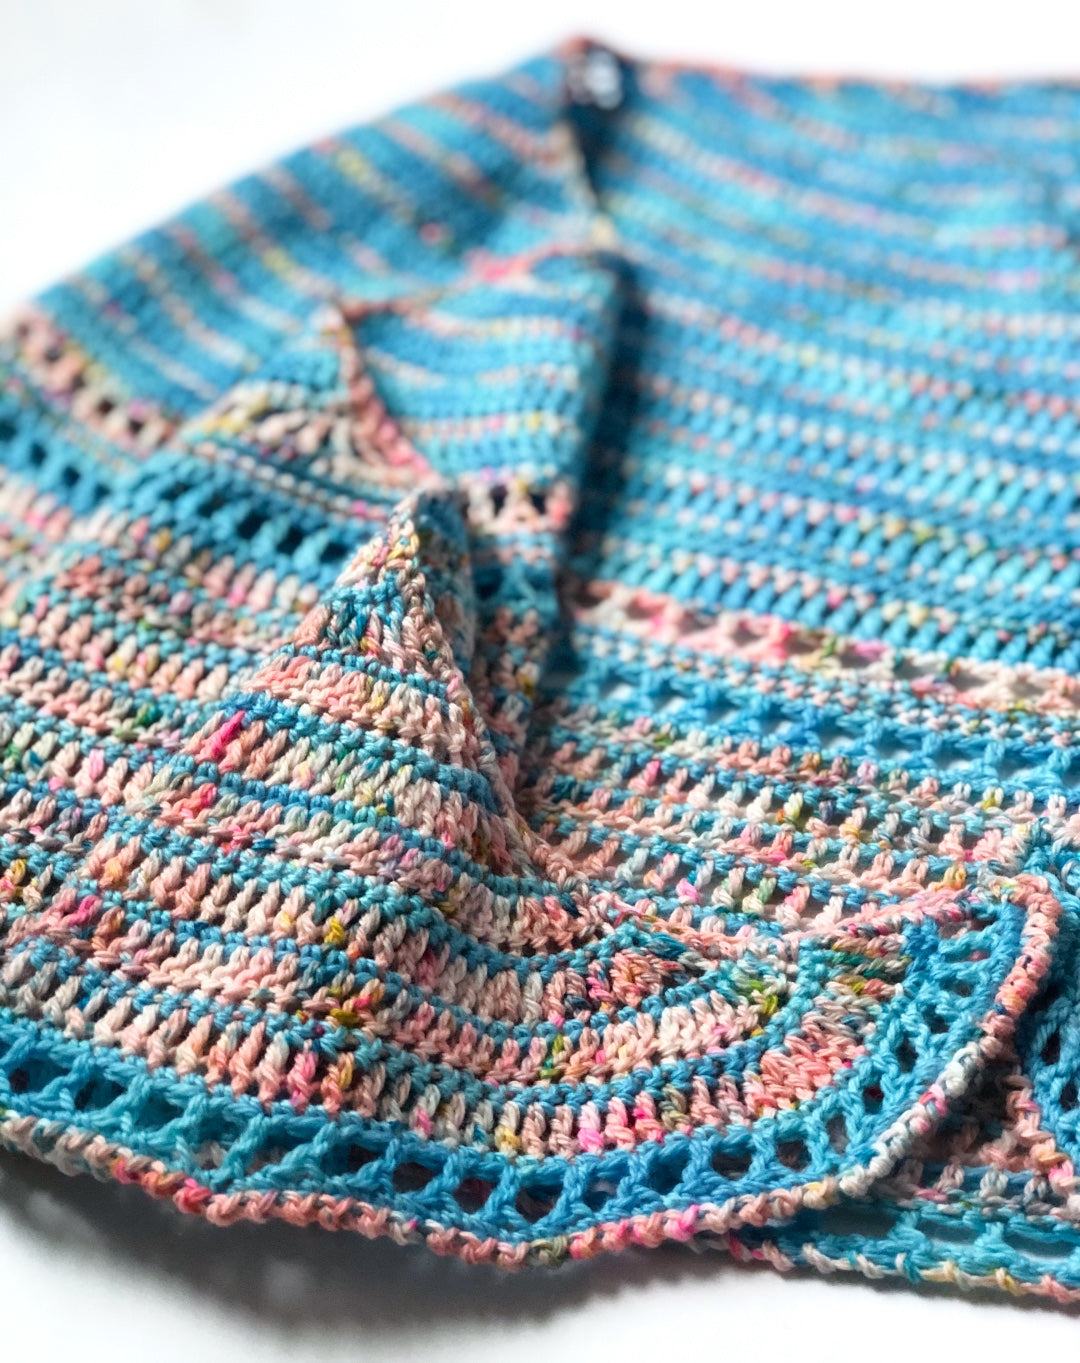 Comprehensive Introduction to Crochet Course